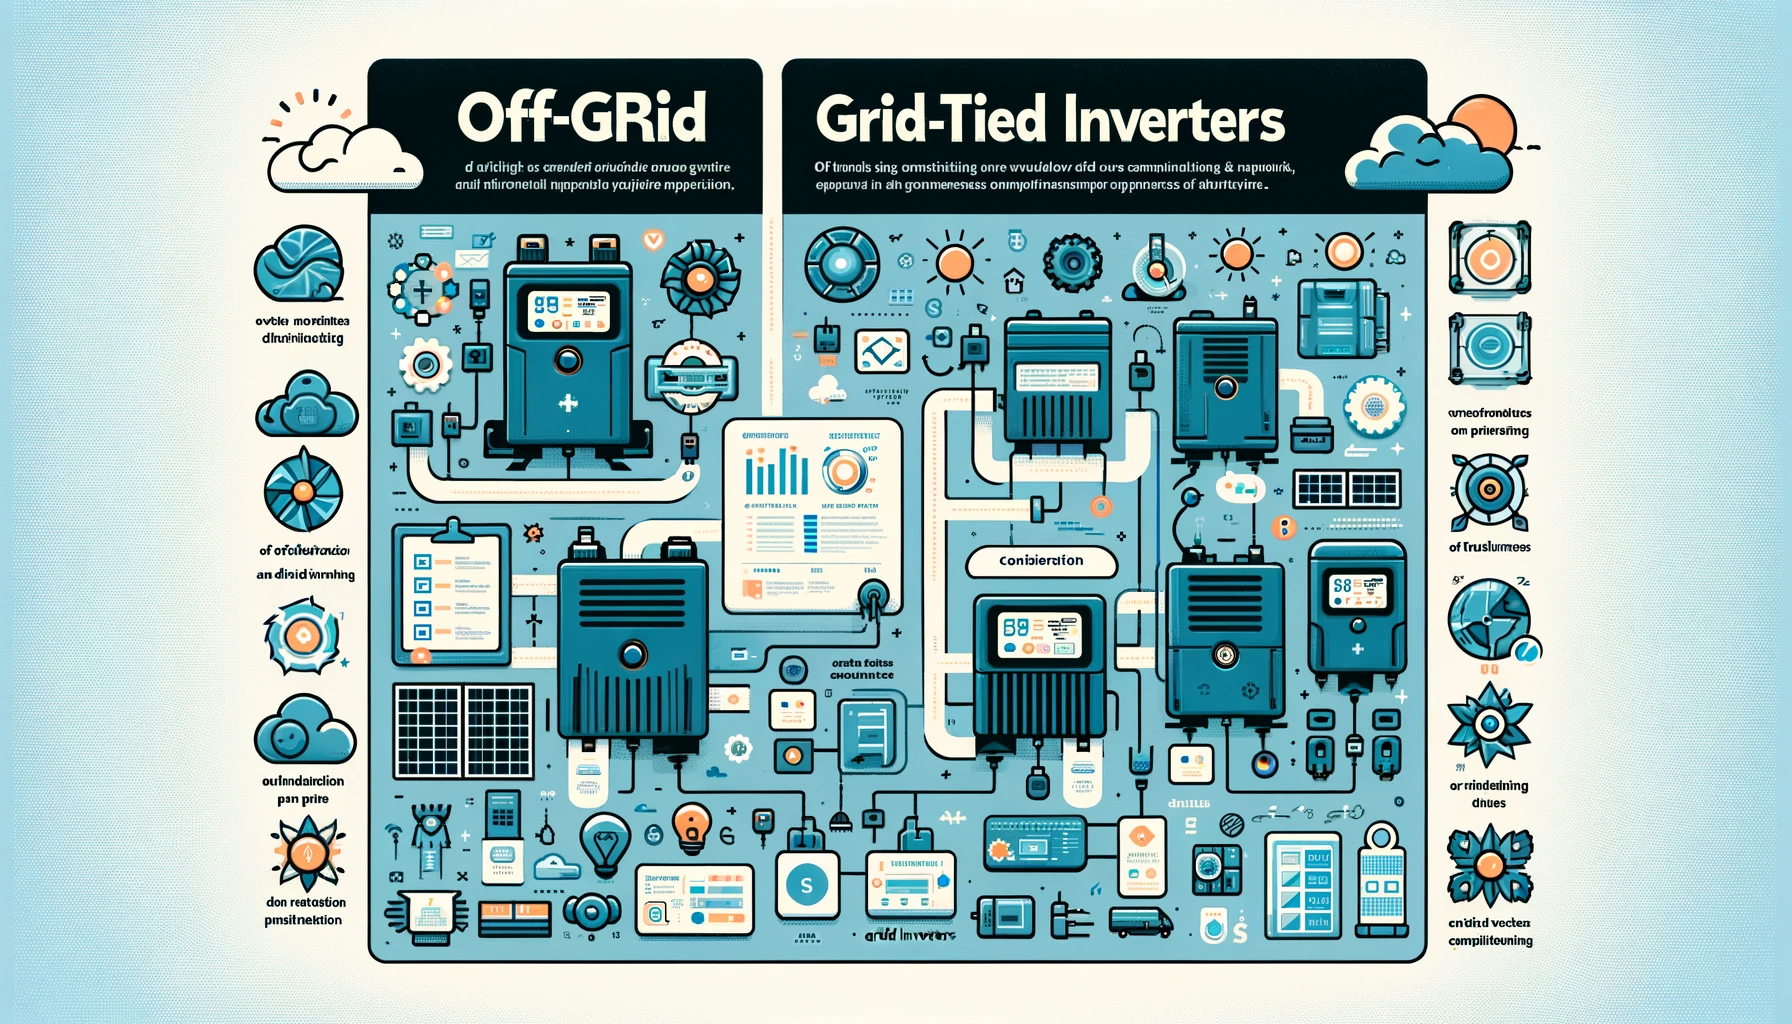 Off-Grid vs Grid-Tied Inverters: What You Need to Know